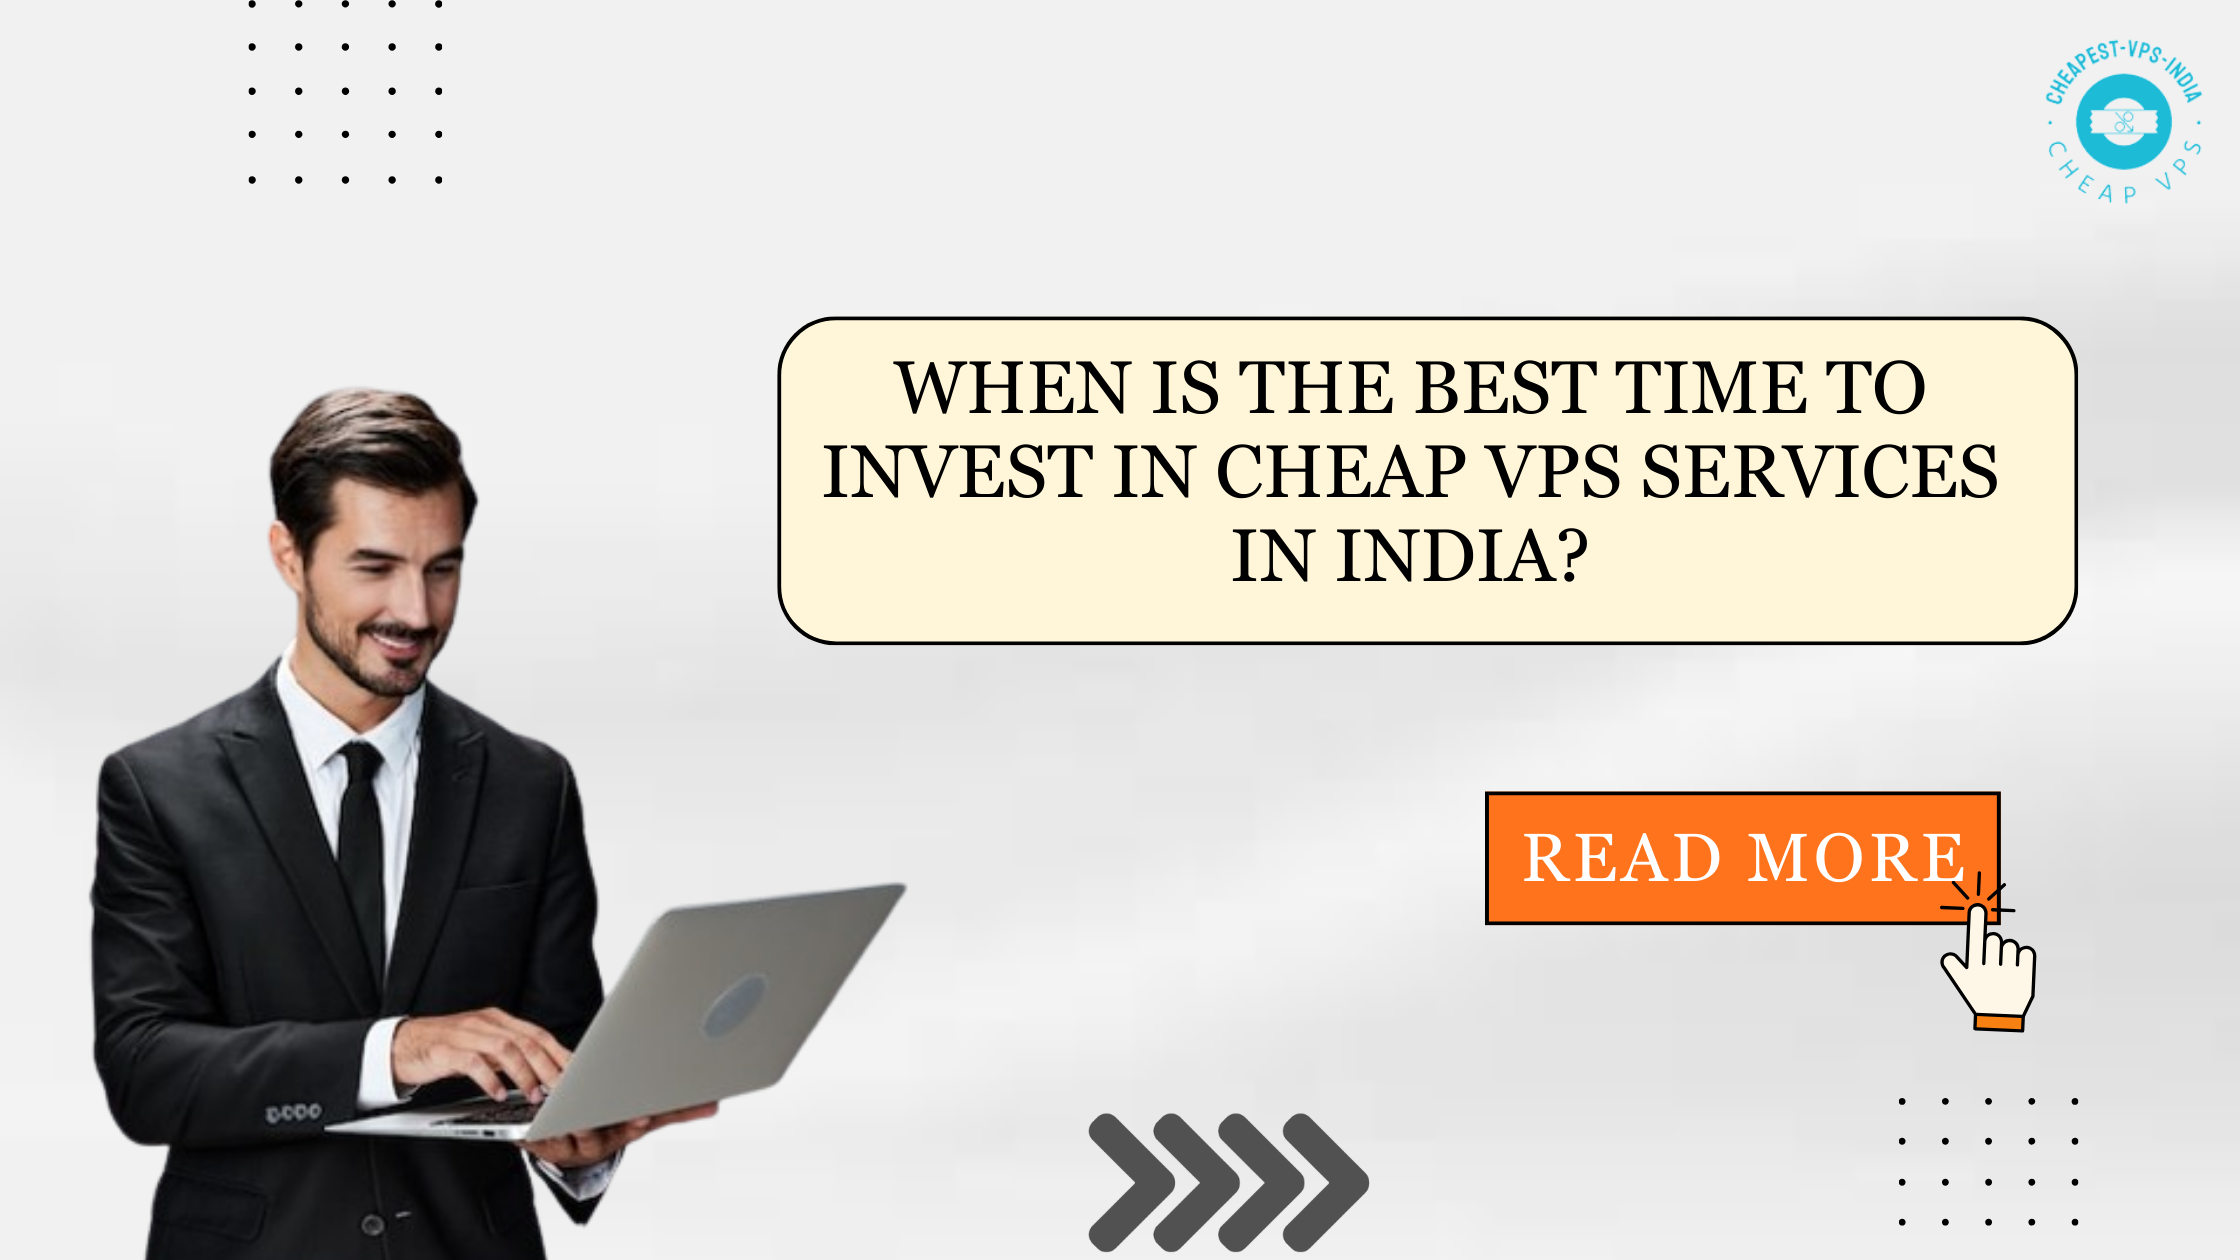 When is the Best Time to Invest in Cheap VPS Services in India